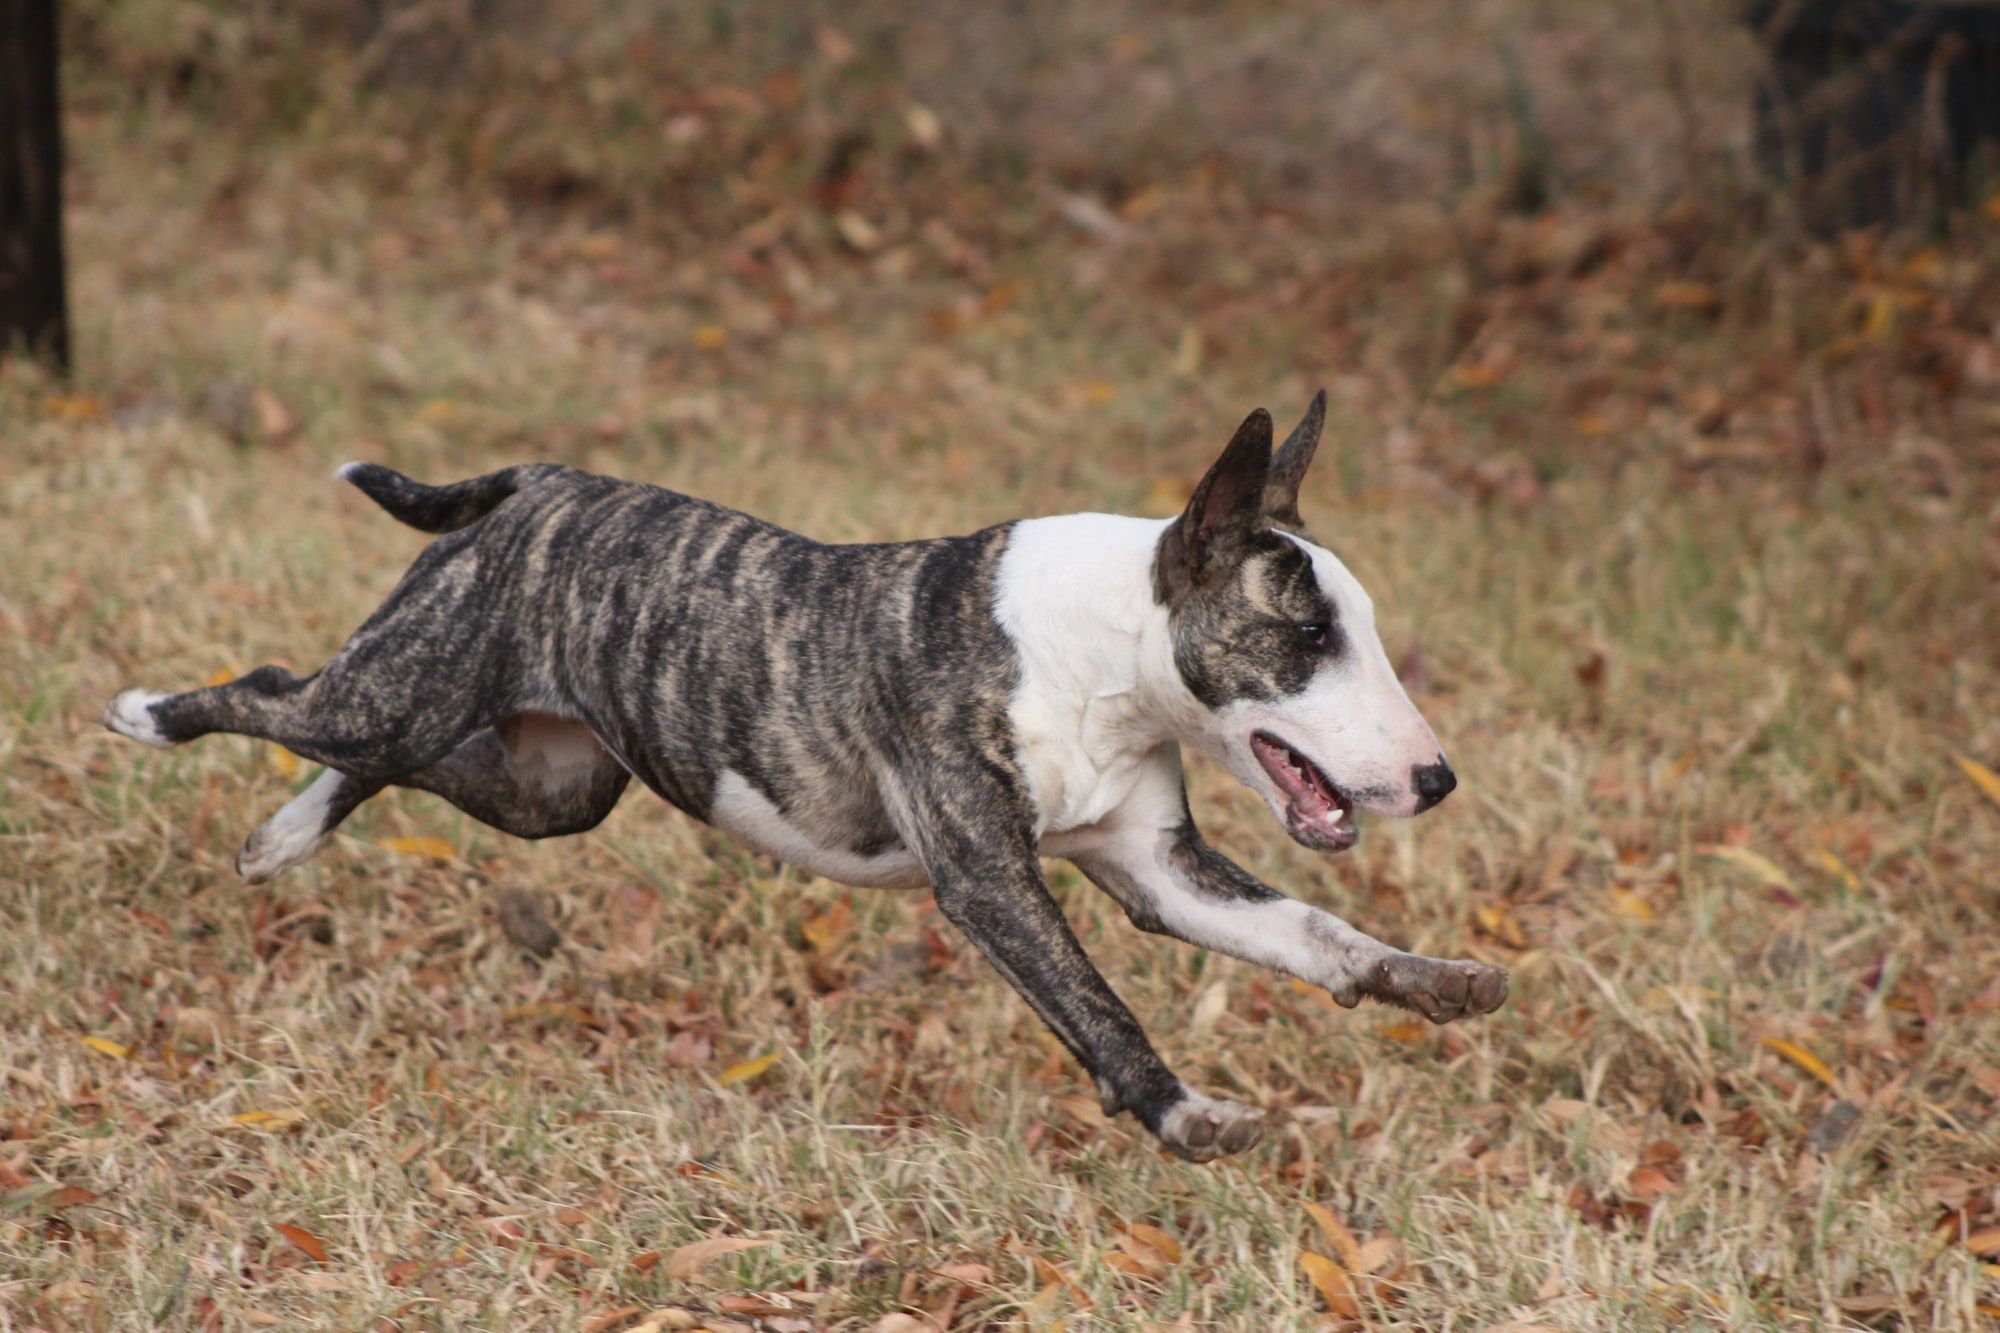 How Fast Can A Dog Run?